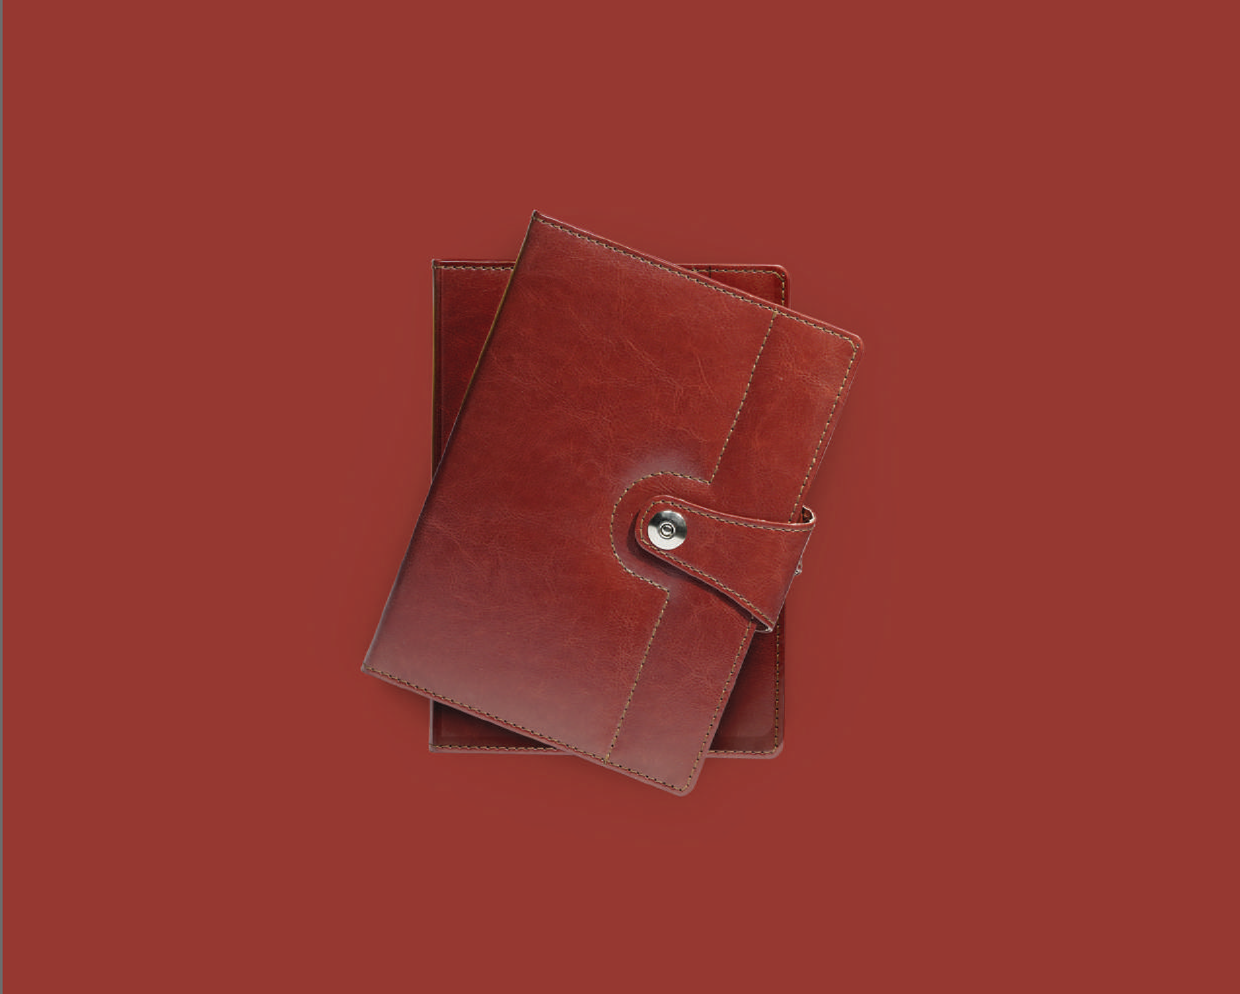 LEATHER DIARY WITH BUTTON LOCK